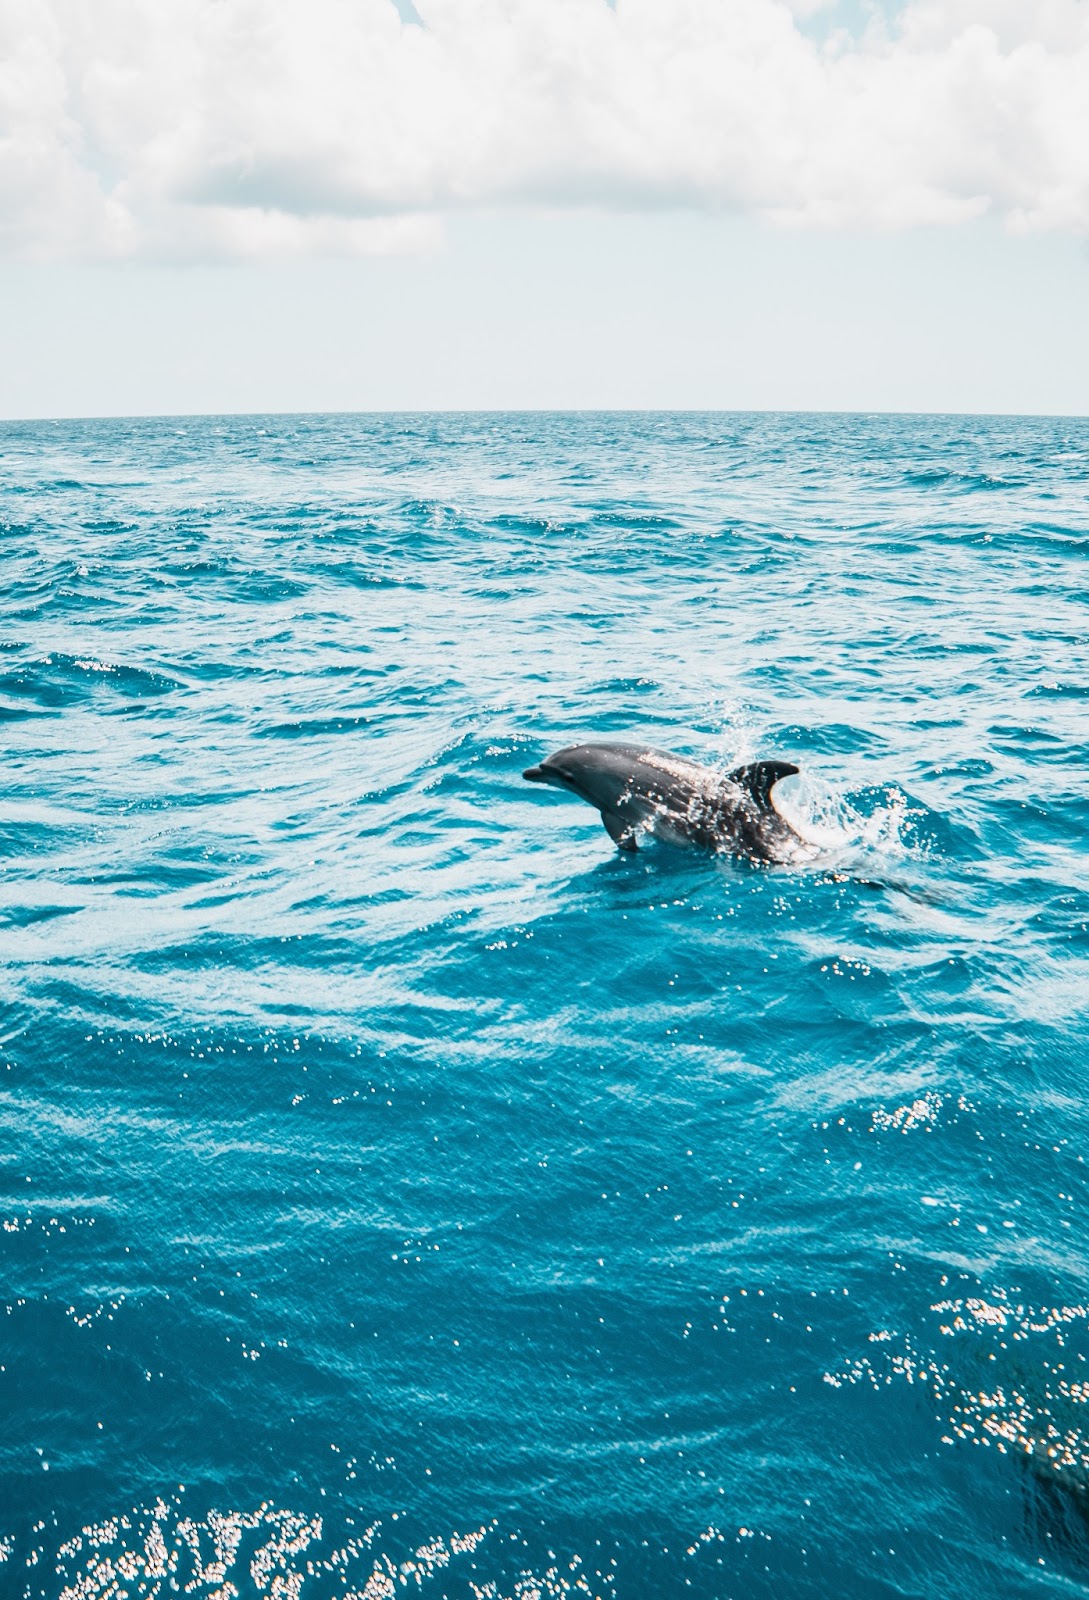 A photo of bottlenose dolphins leaping gracefully in the turquoise waters of Eastern National Park.